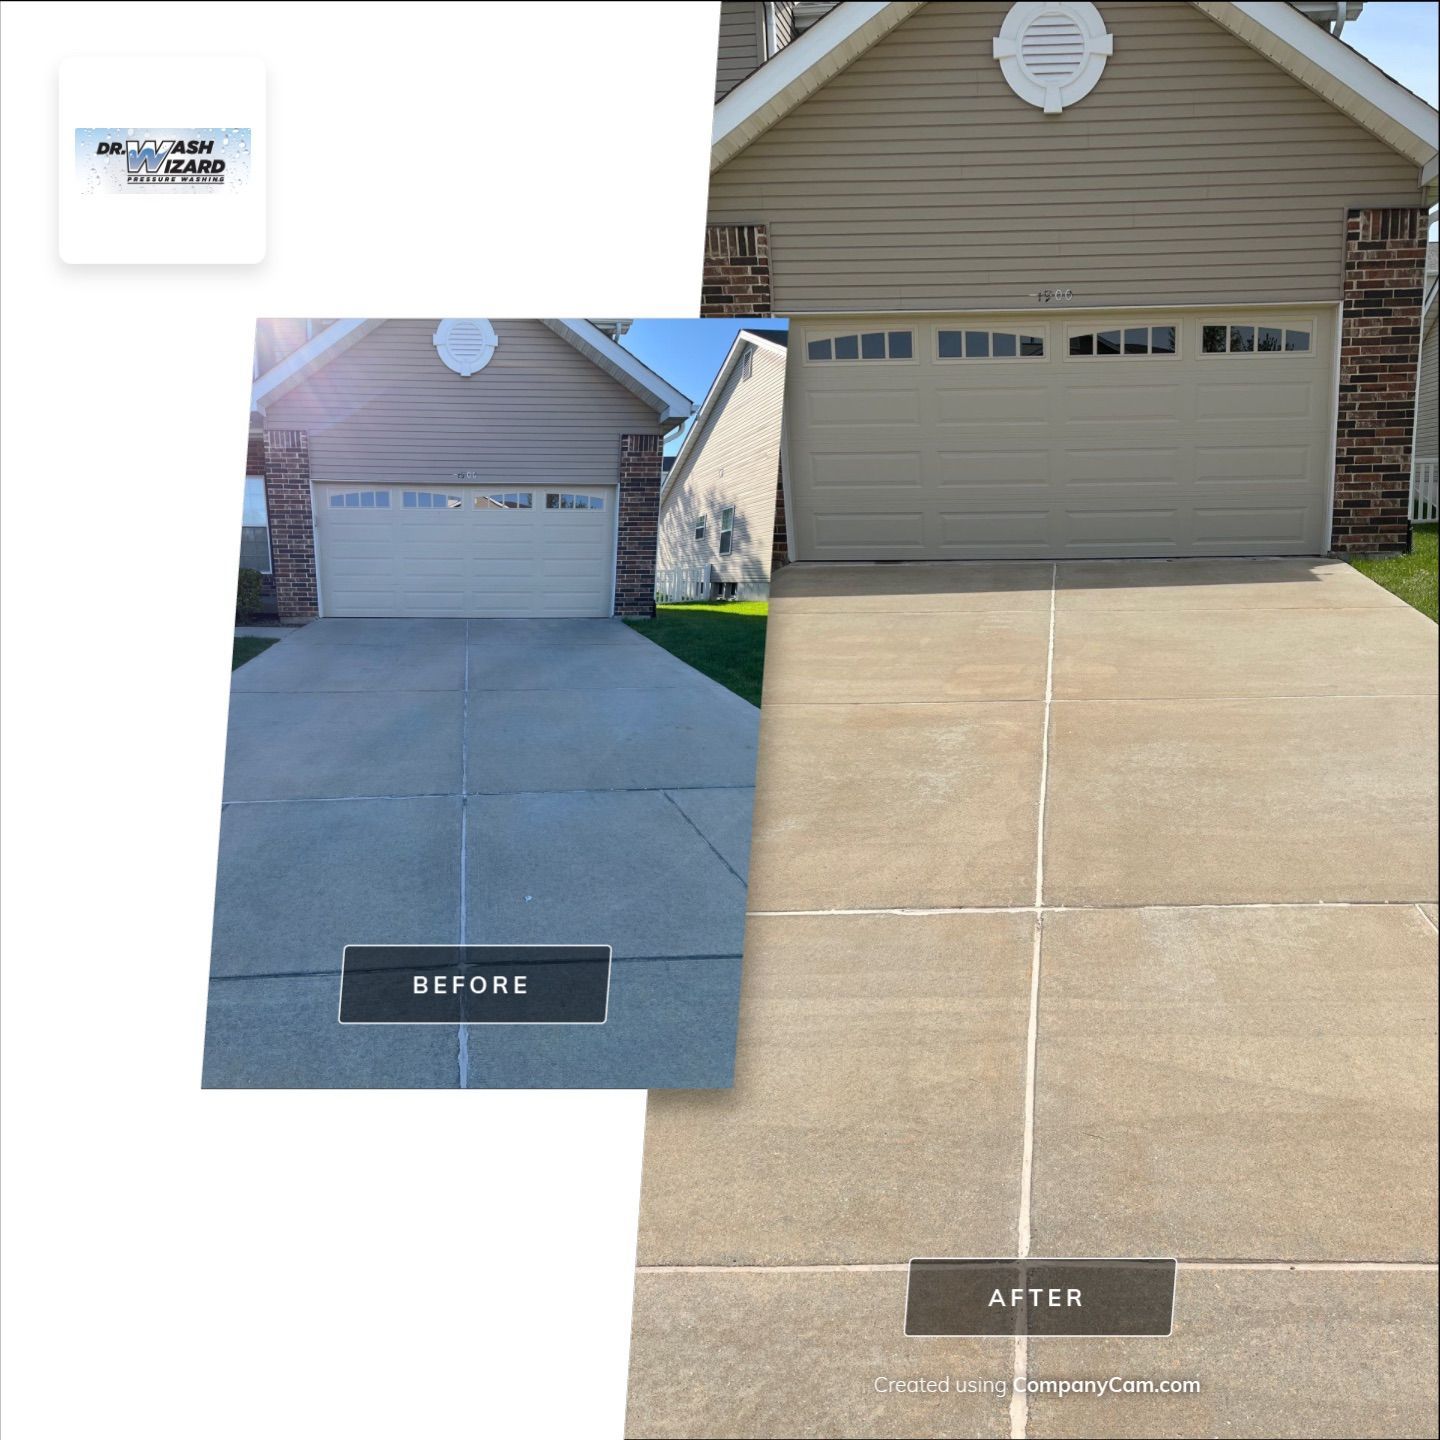 Dr. Wash Wizard Pressure Washing: Revitalizing Homes in St. Charles, MO! Image